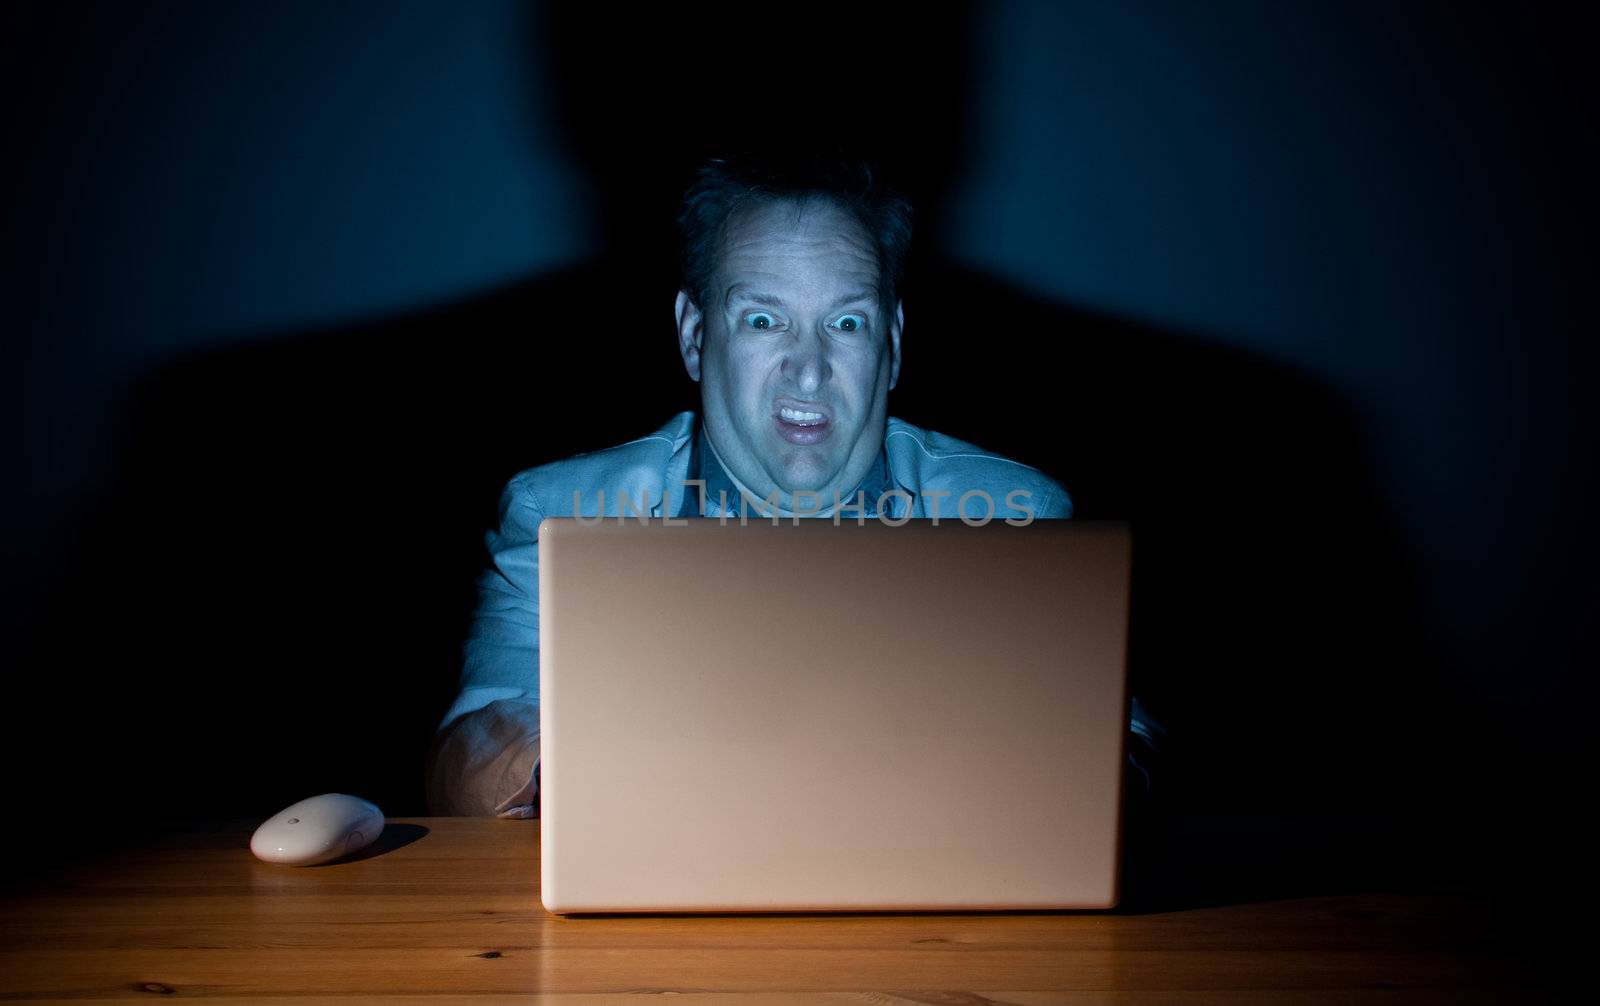 Man looking disgusted in front of his computer